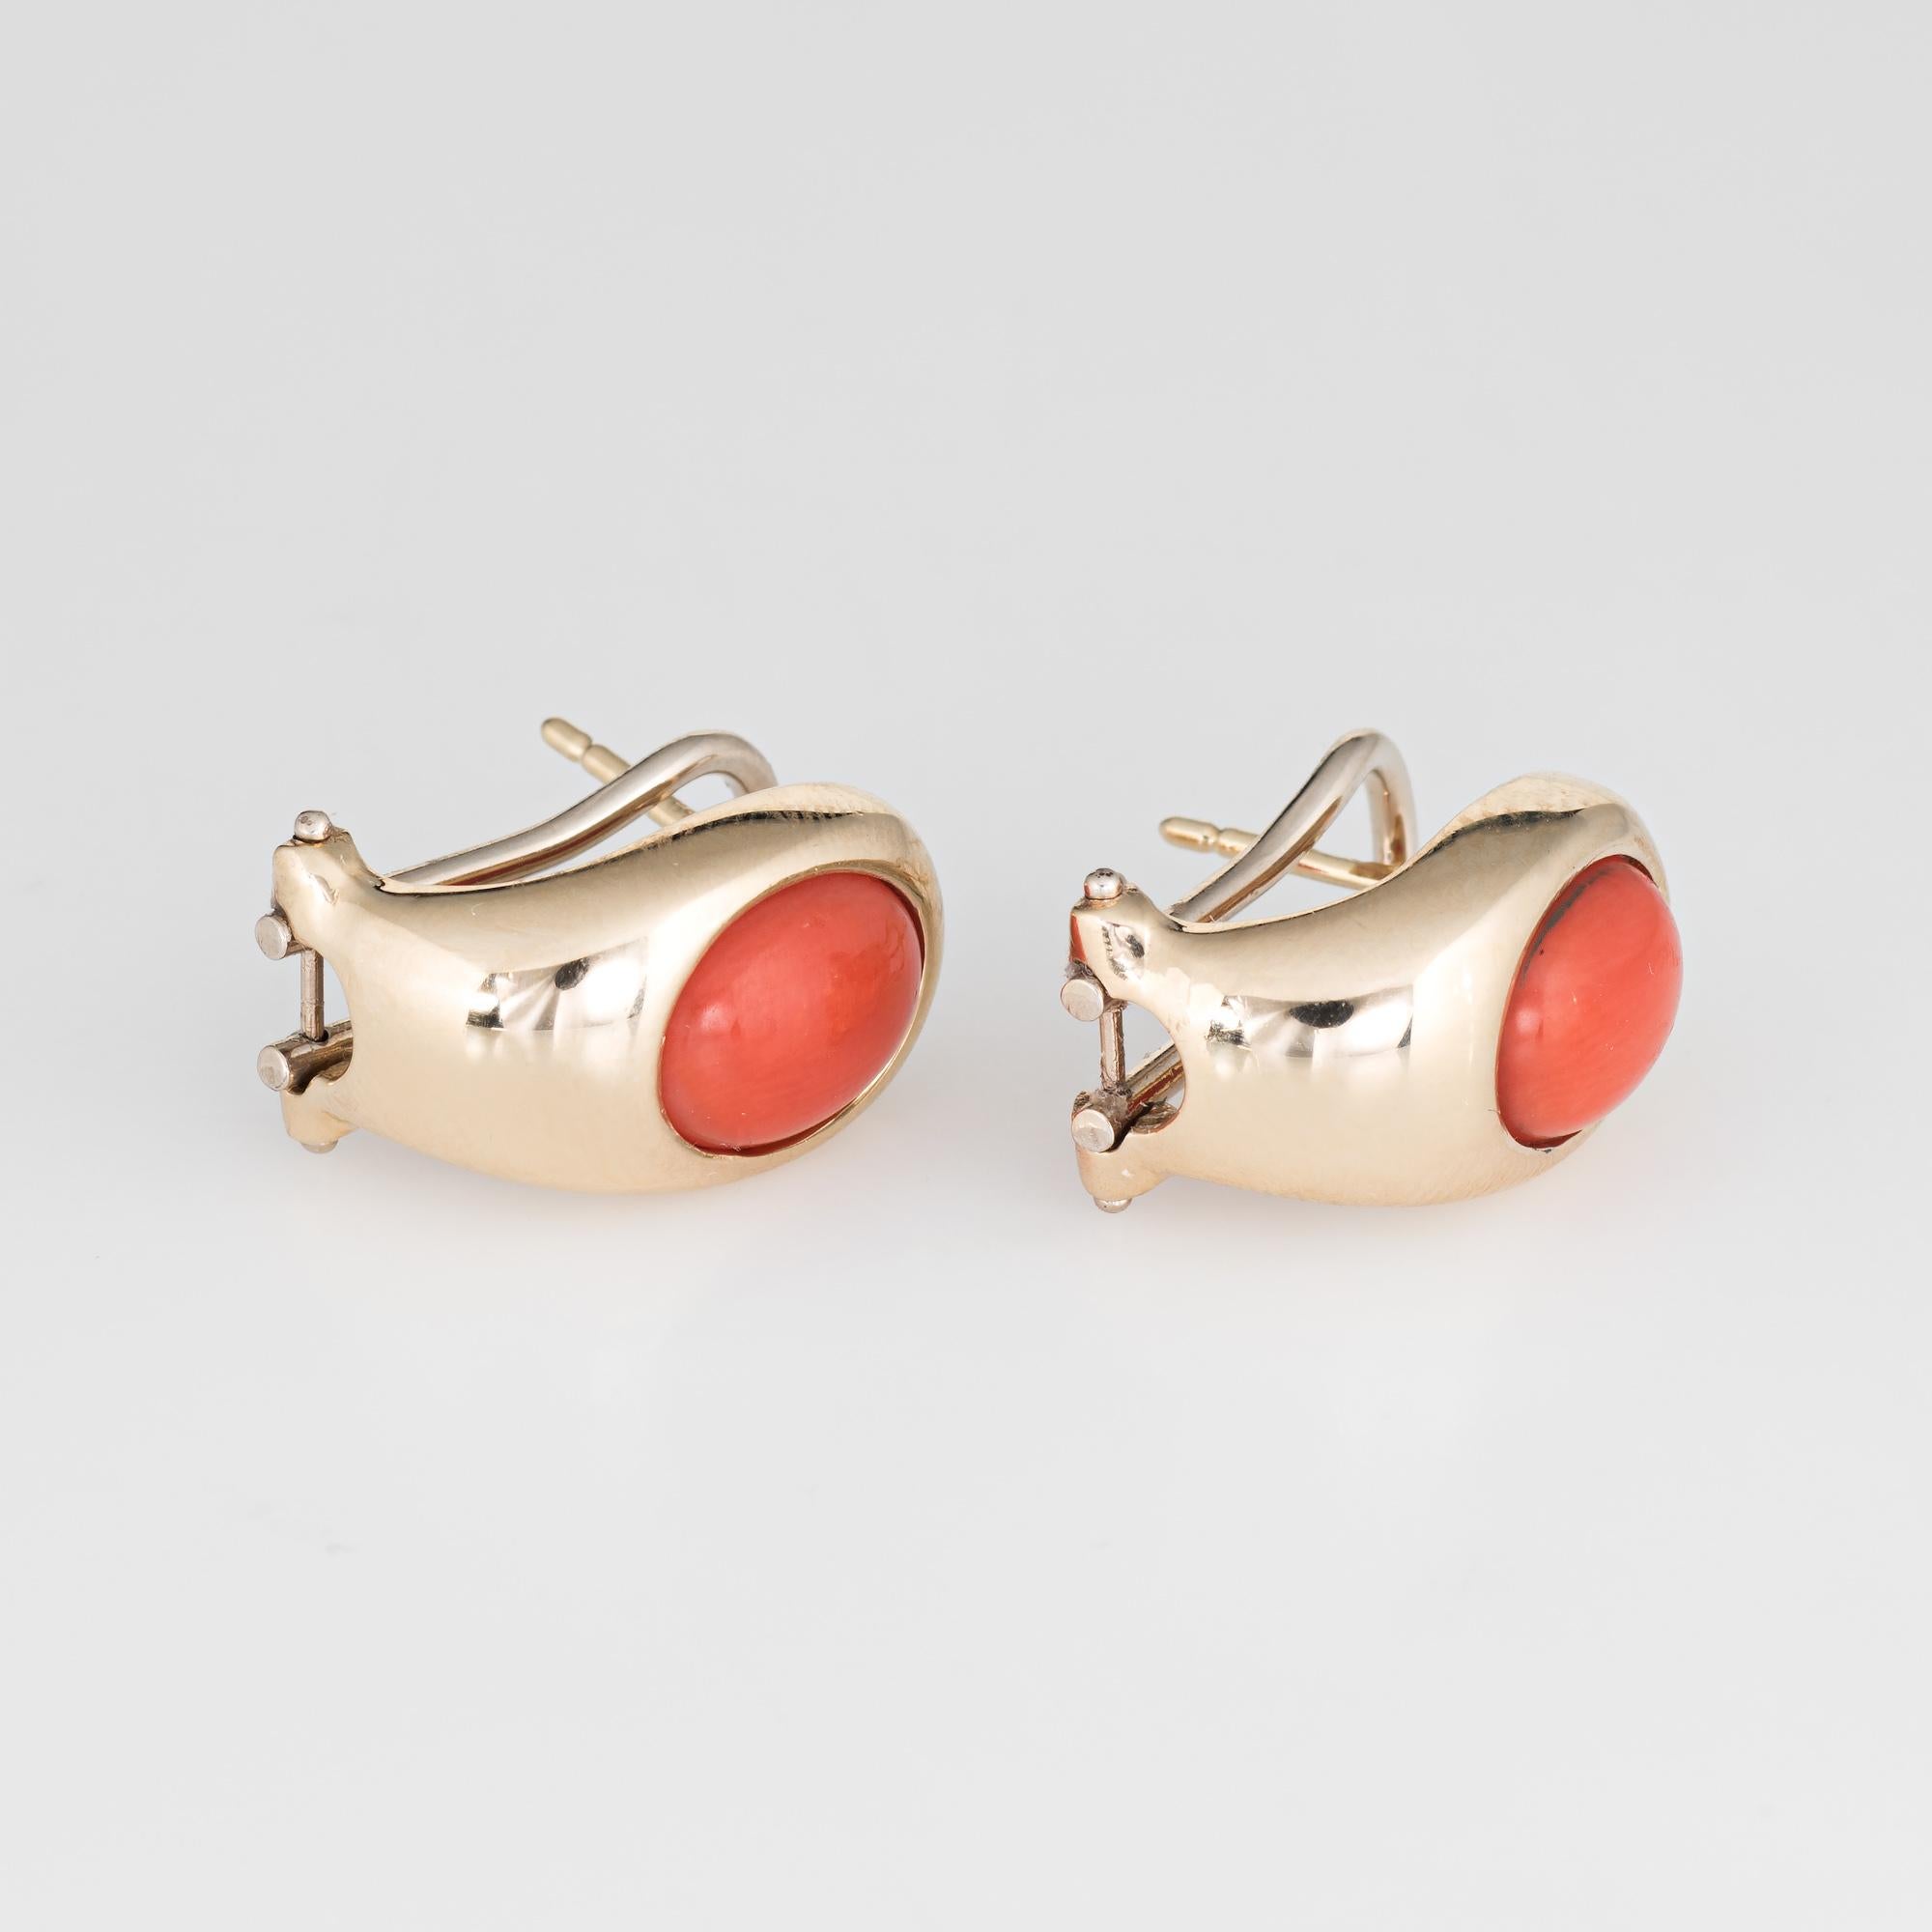 Elegant pair of vintage coral earrings crafted in 14k yellow gold. 

Cabochon cut coral measures 9mm x 6.5mm (estimated at 1.75 carats each - 3.50 carats total estimated weight). The coral is in excellent condition and free of cracks or chips. 

The